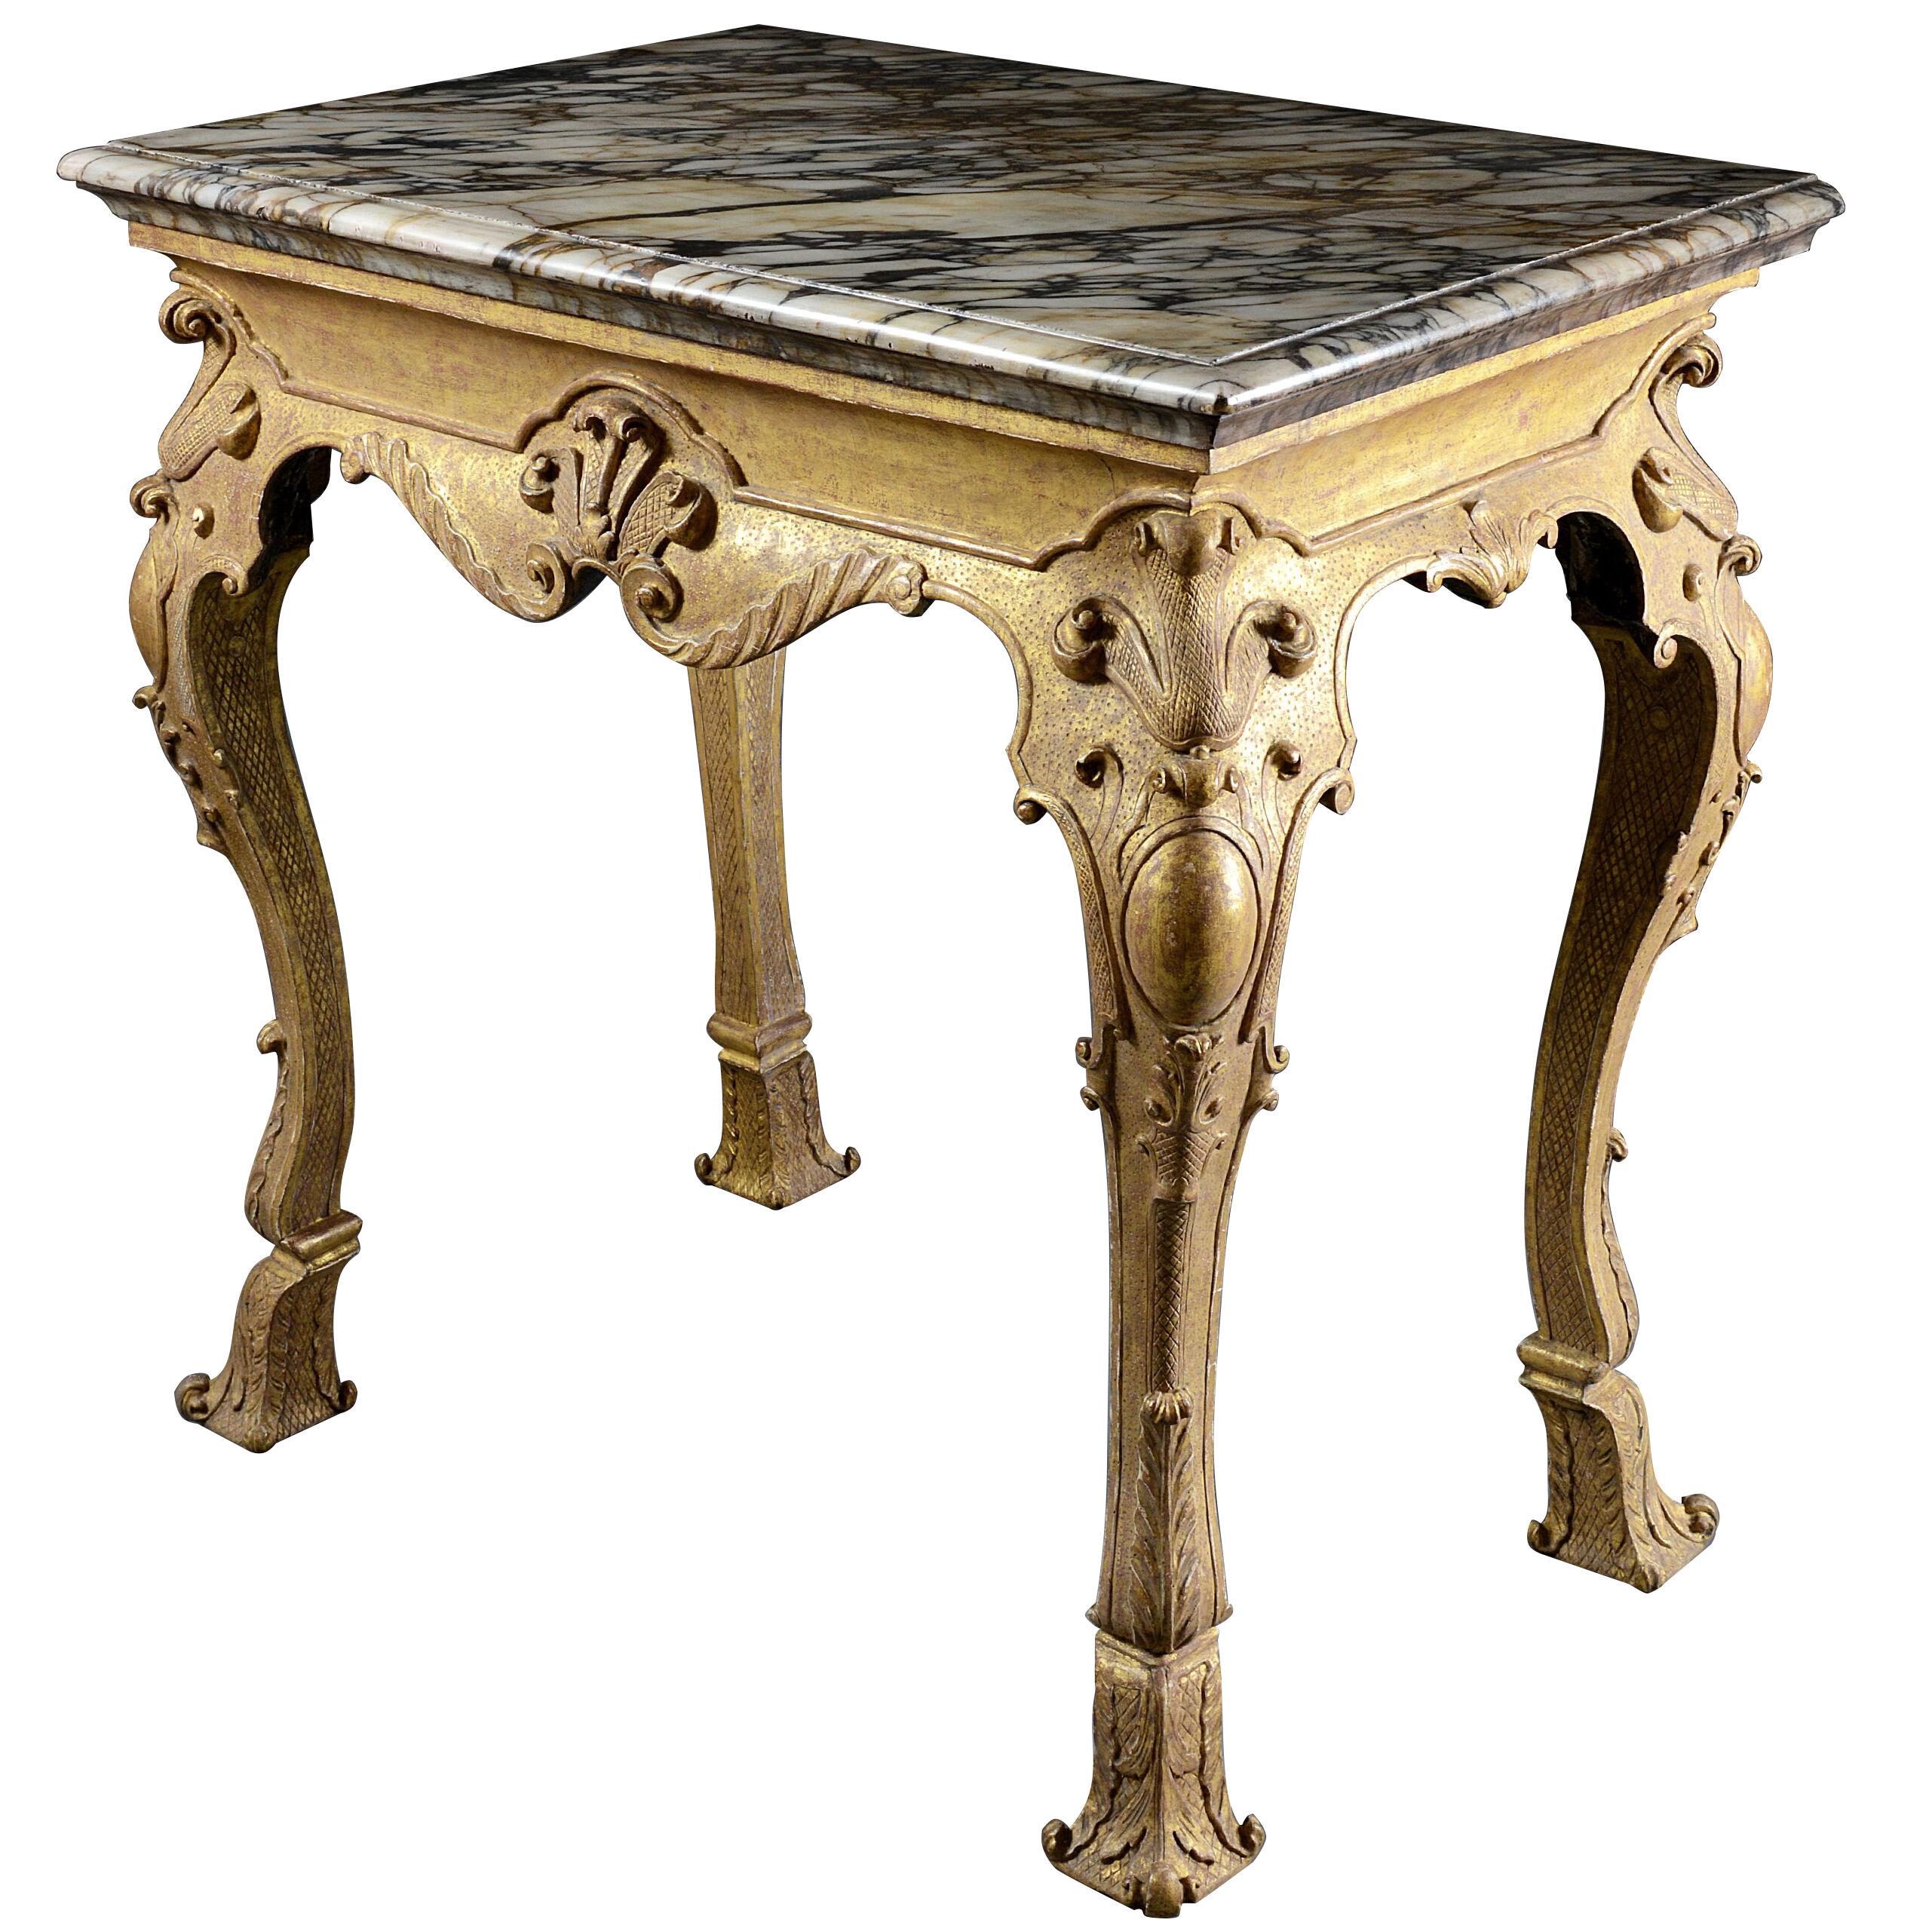 A Rare George I Giltwood Side Table possibly by James Moore